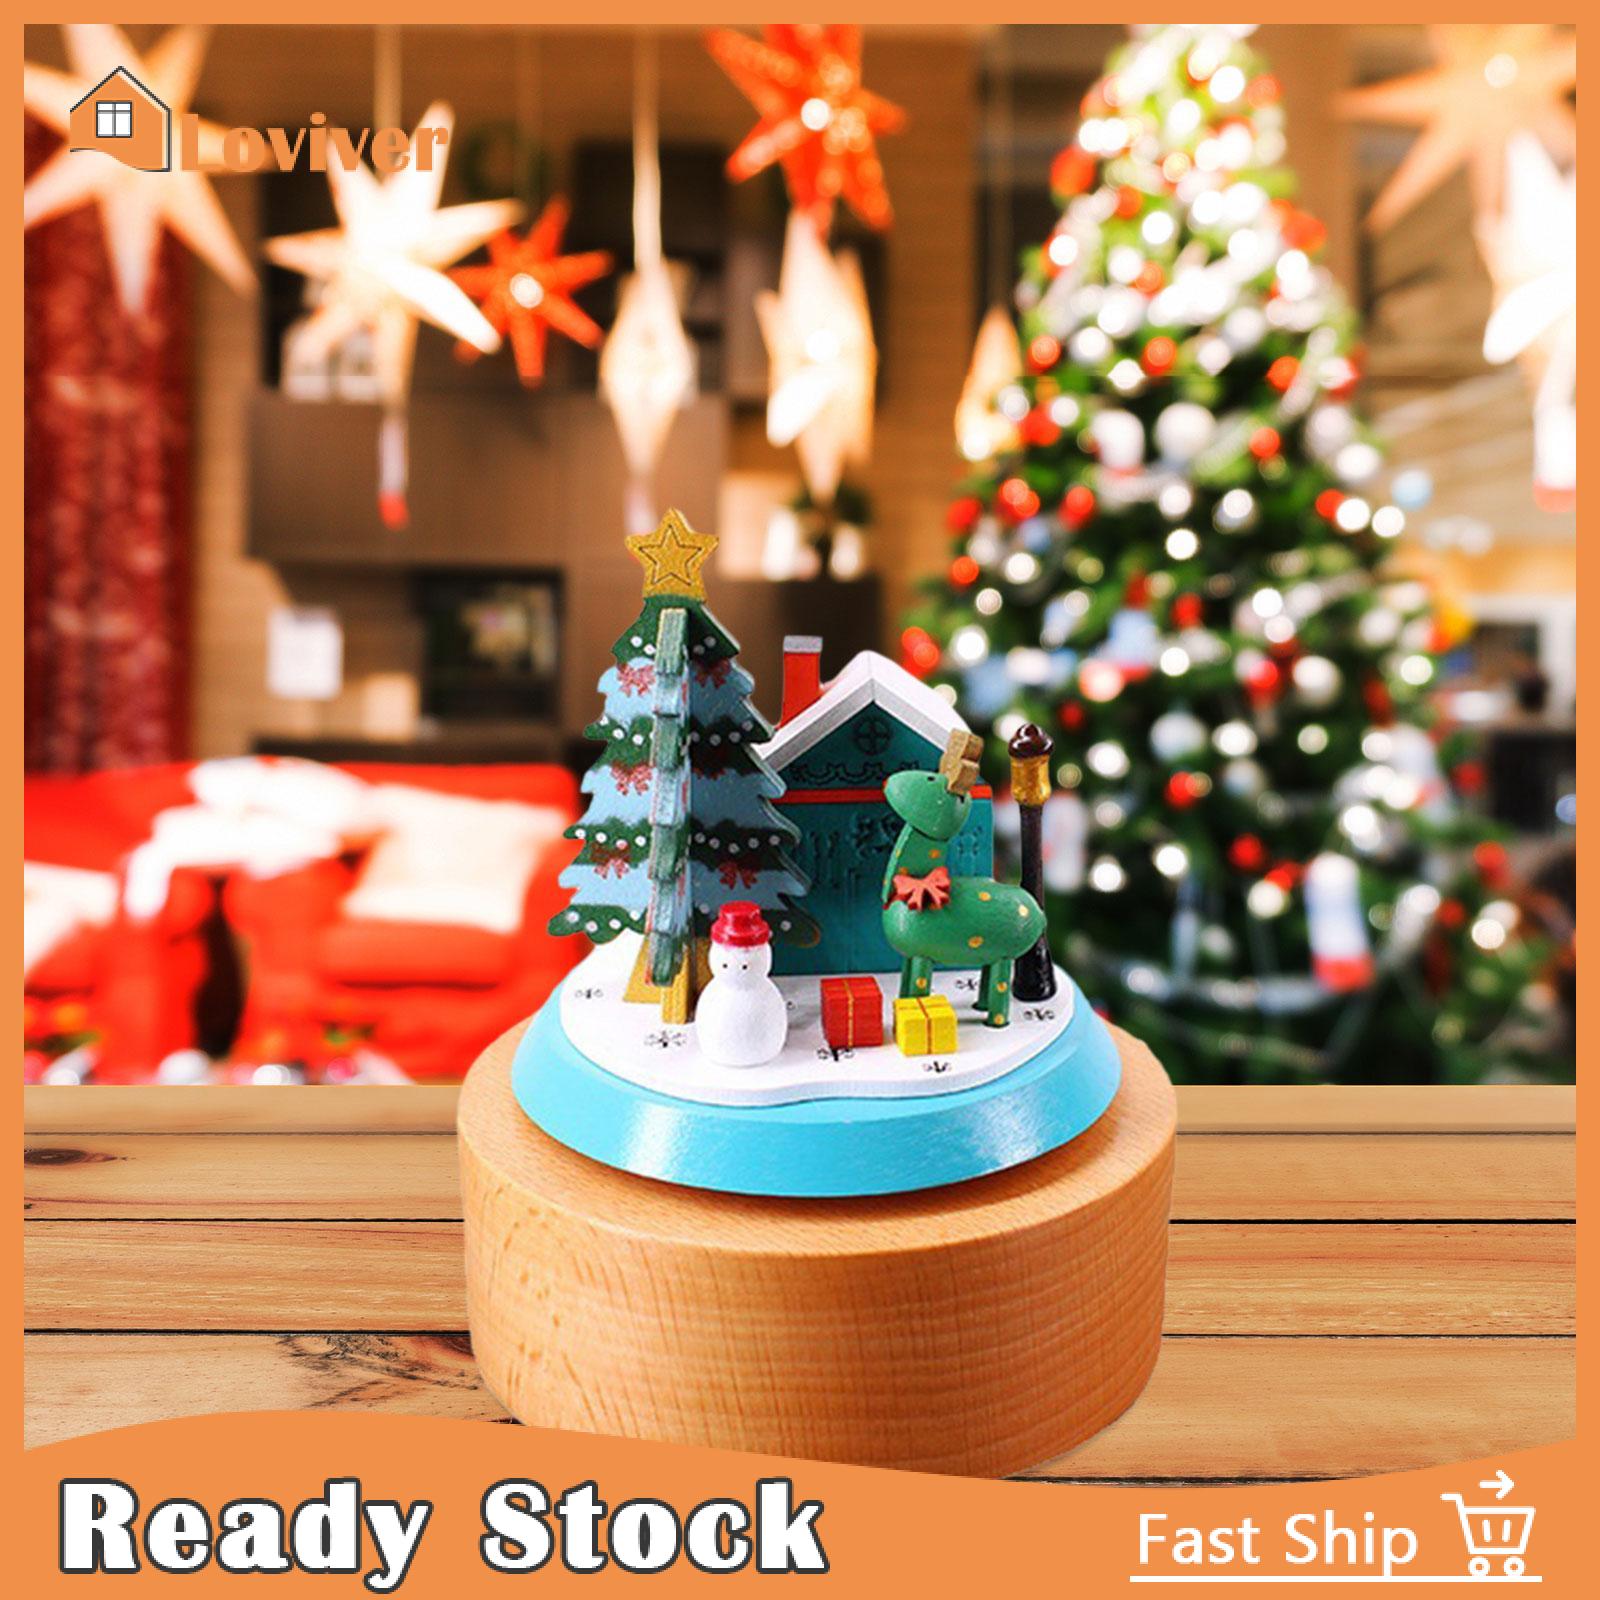 Loviver Christmas Wooden Musical Box Ornaments Music Movement Play Melody